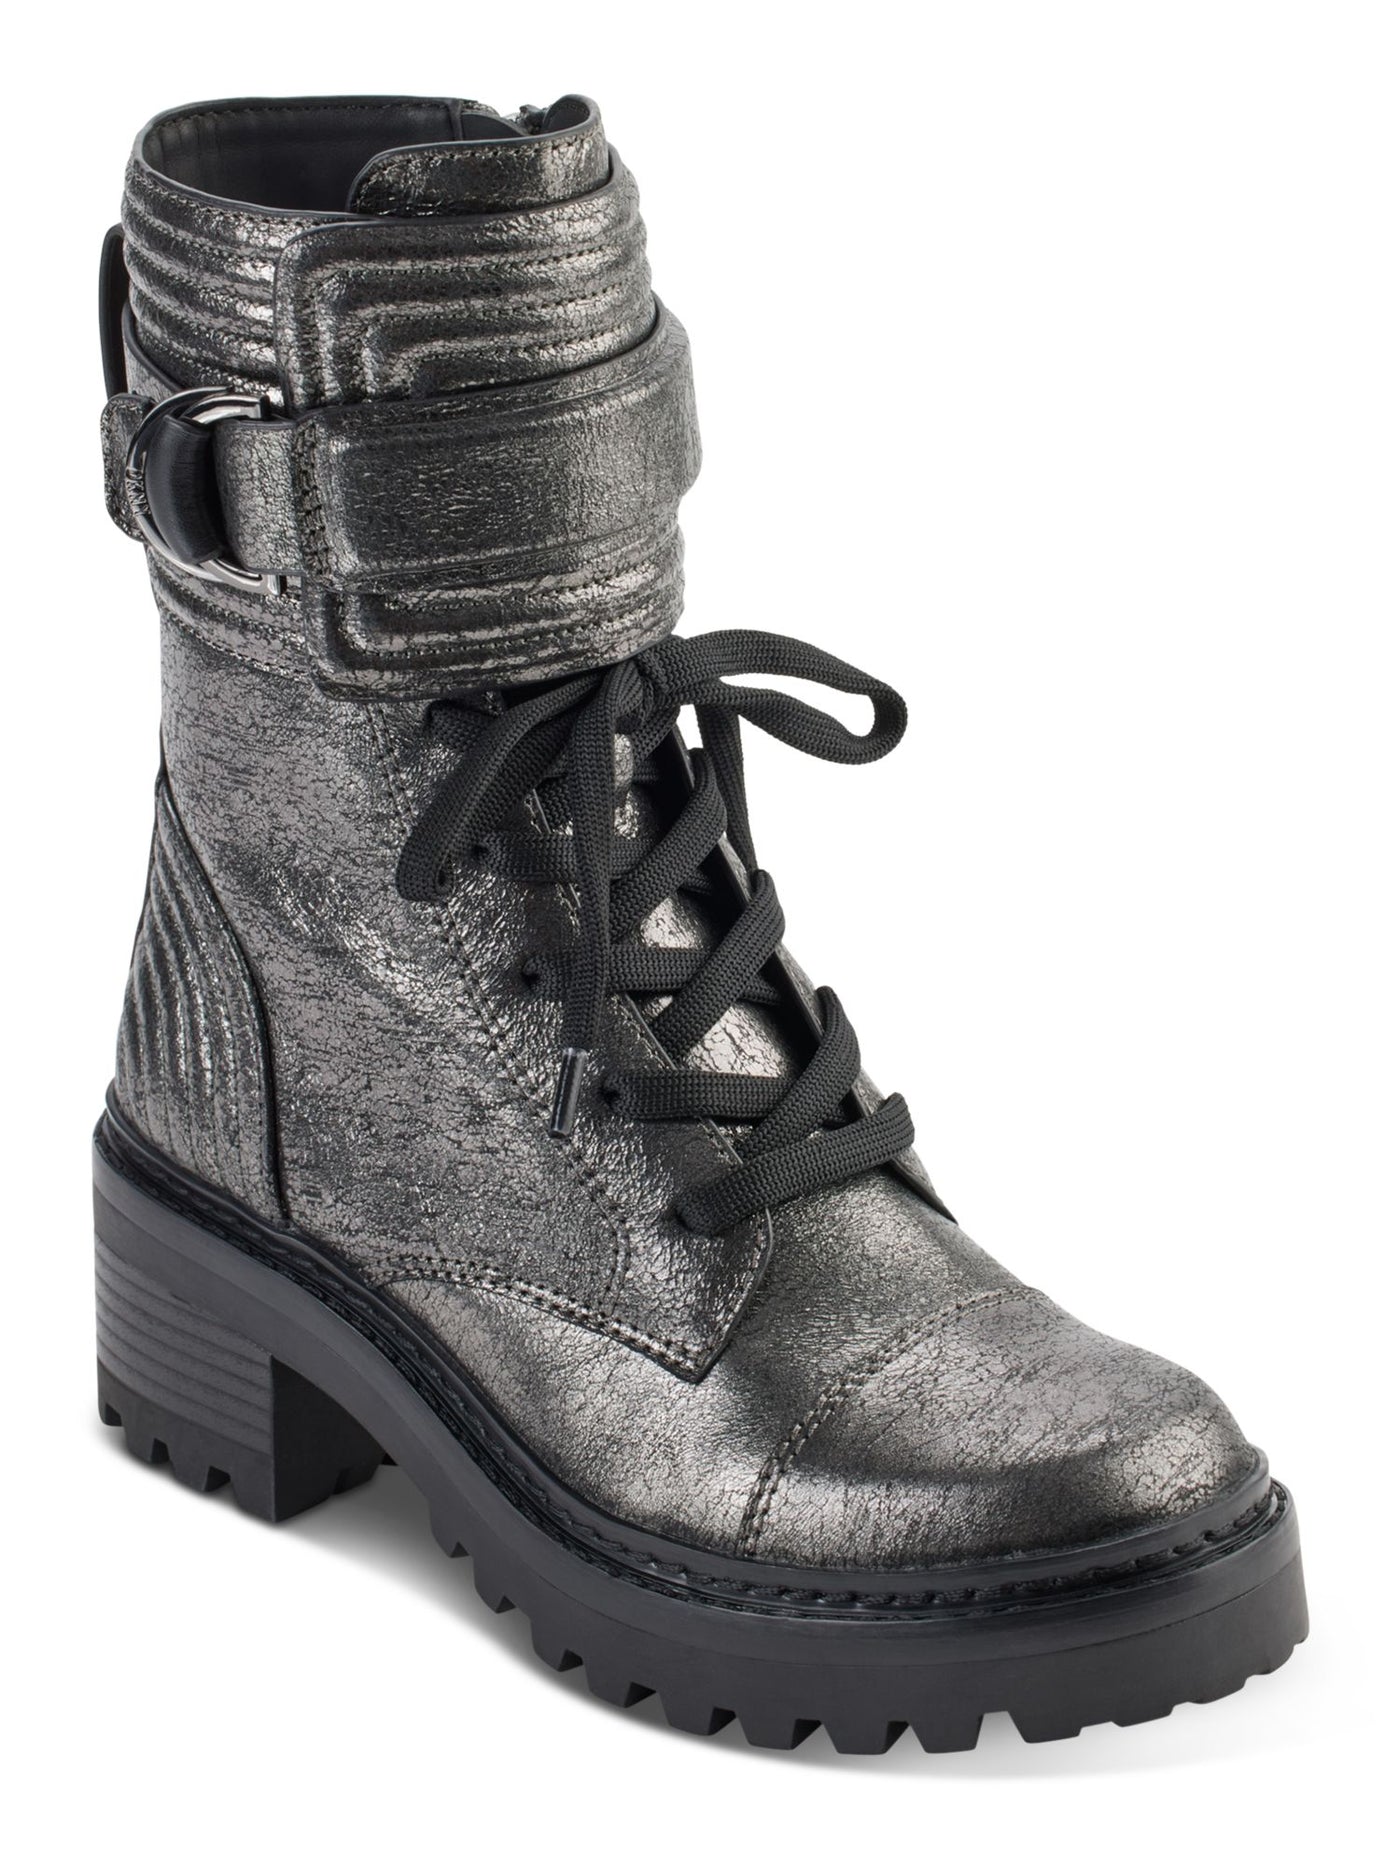 DKNY Womens Silver Buckle Accent Metallic Basia Round Toe Block Heel Zip-Up Leather Combat Boots 11 M